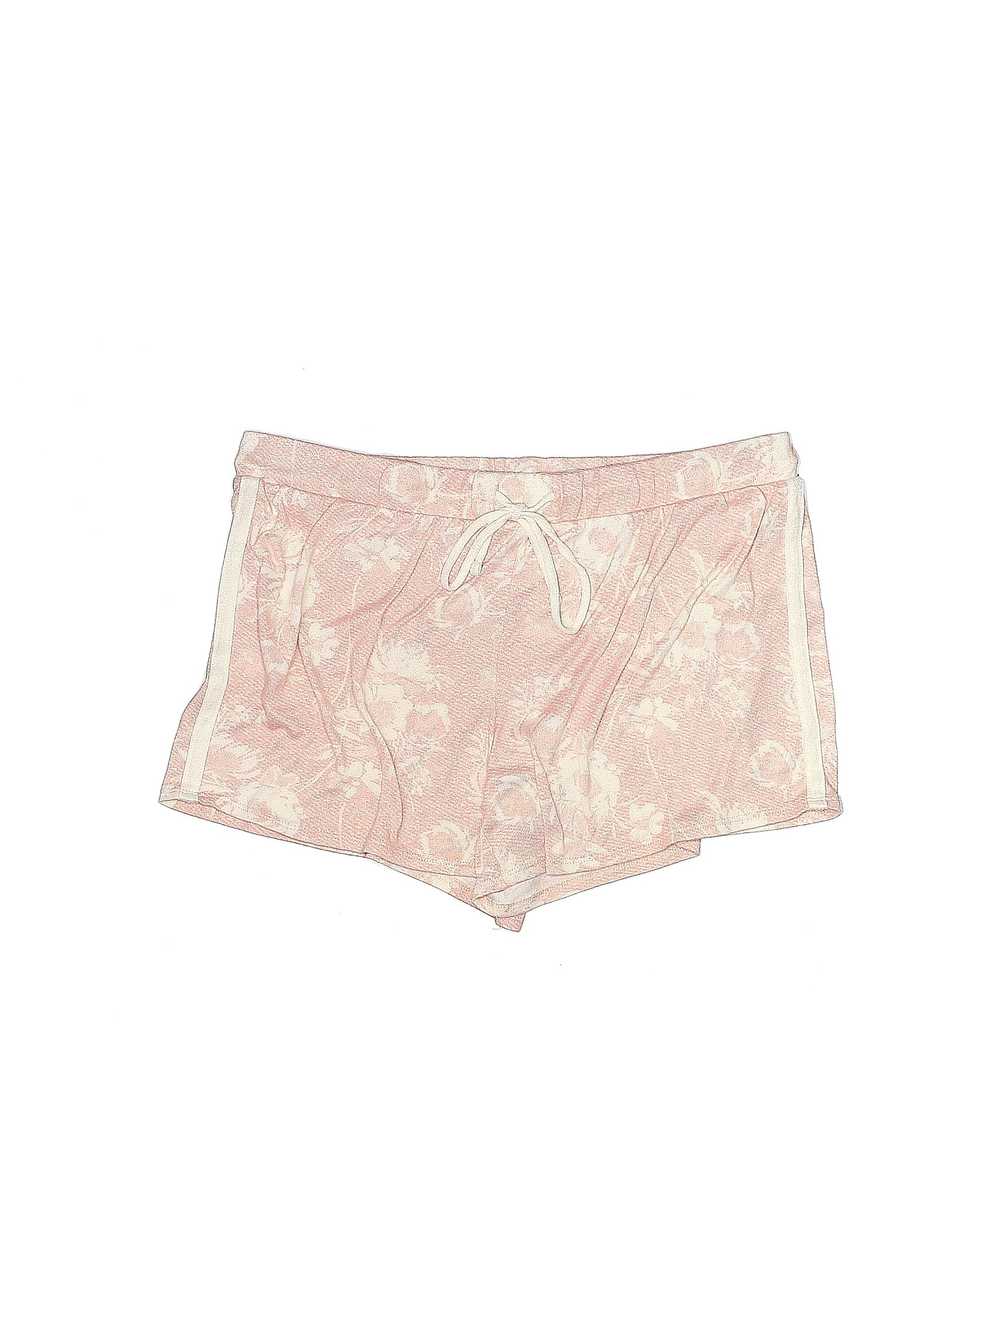 Lucky Brand Women Pink Shorts L - image 1